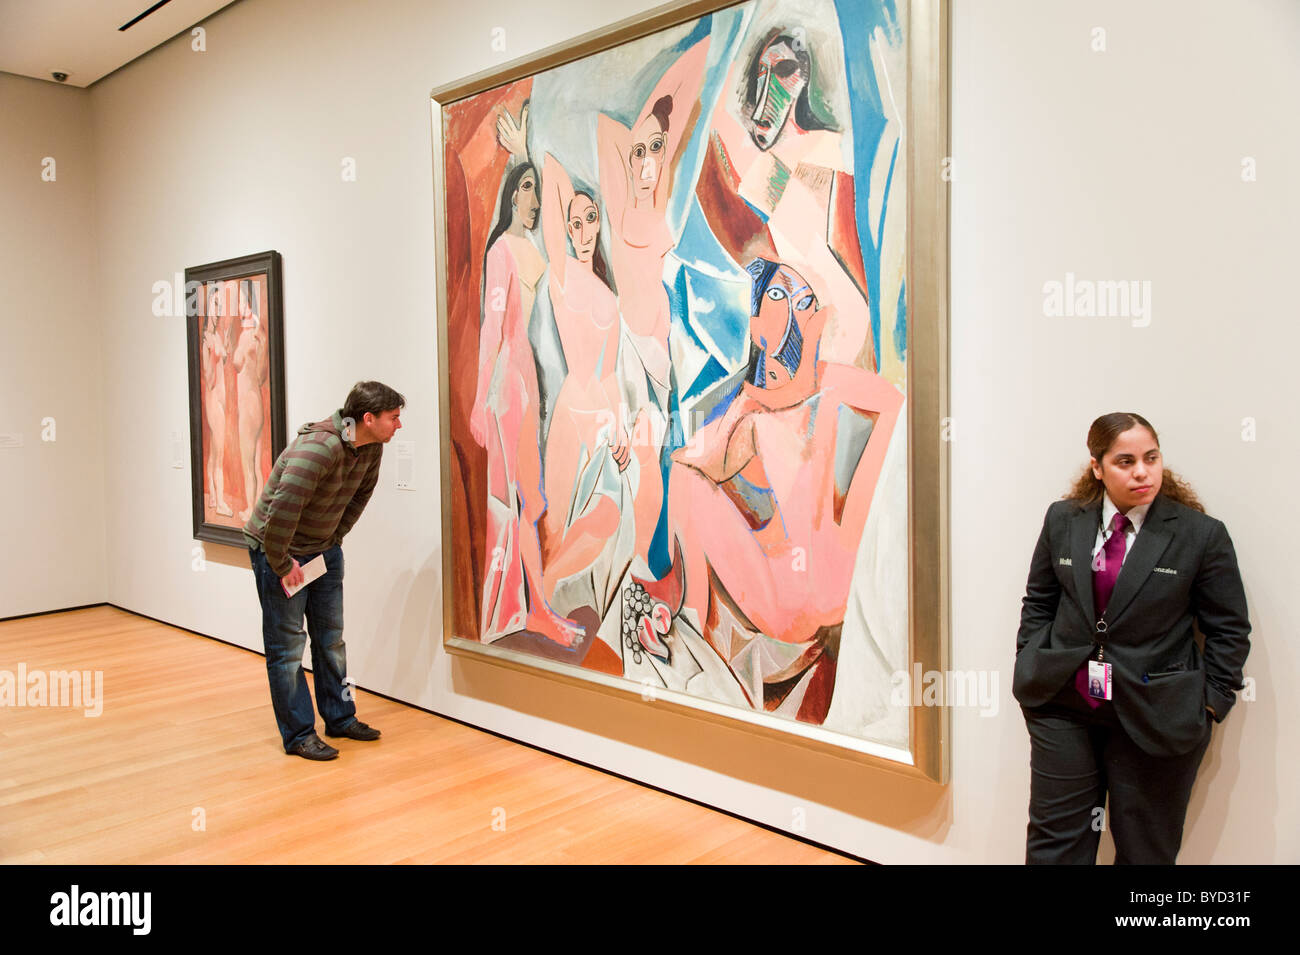 Les Demoiselles d'Avignon by Picasso in the Museum of Modern Art, New York, USA Stock Photo